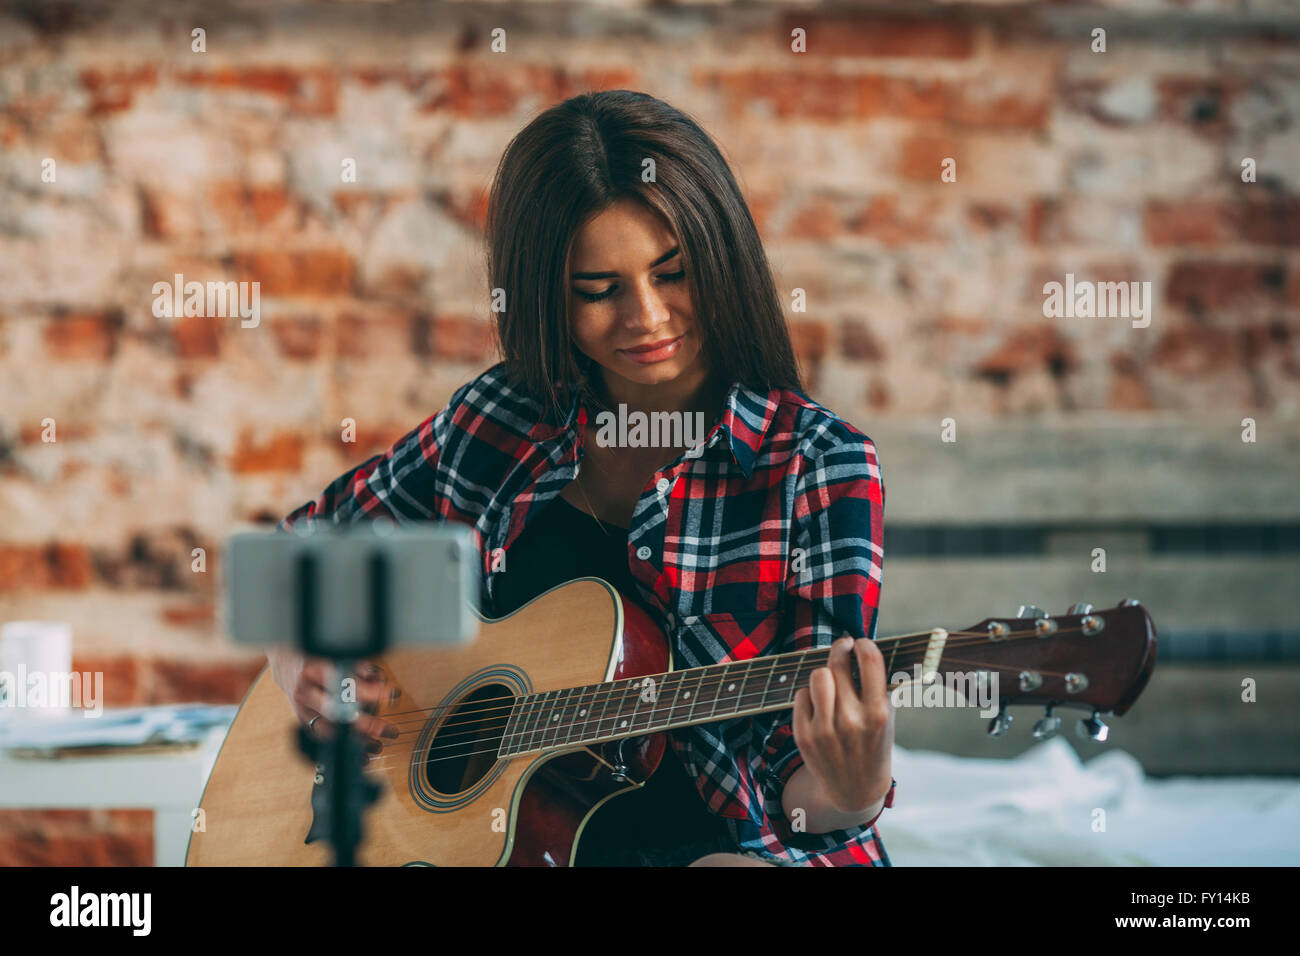 Smart phone in monopod with woman playing guitar at home Stock Photo